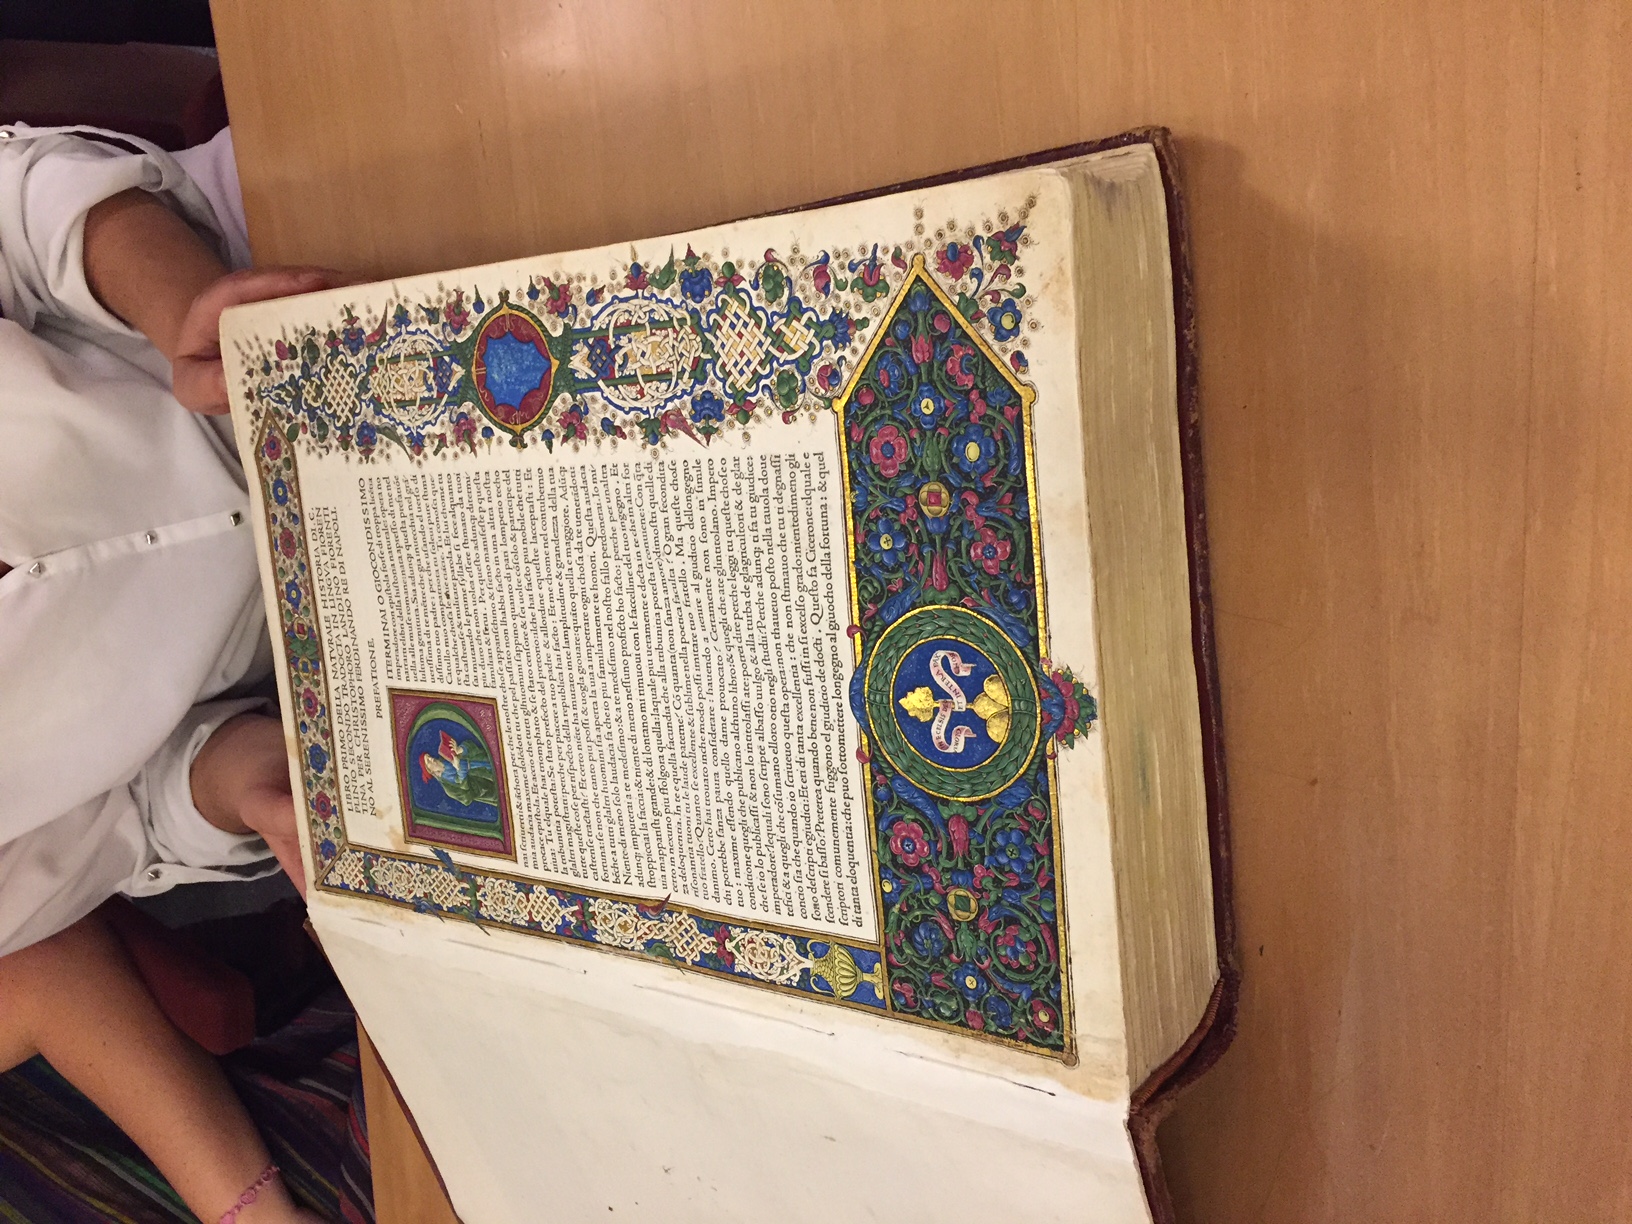 Old book with text surrounded by colorful artwork and drawings.